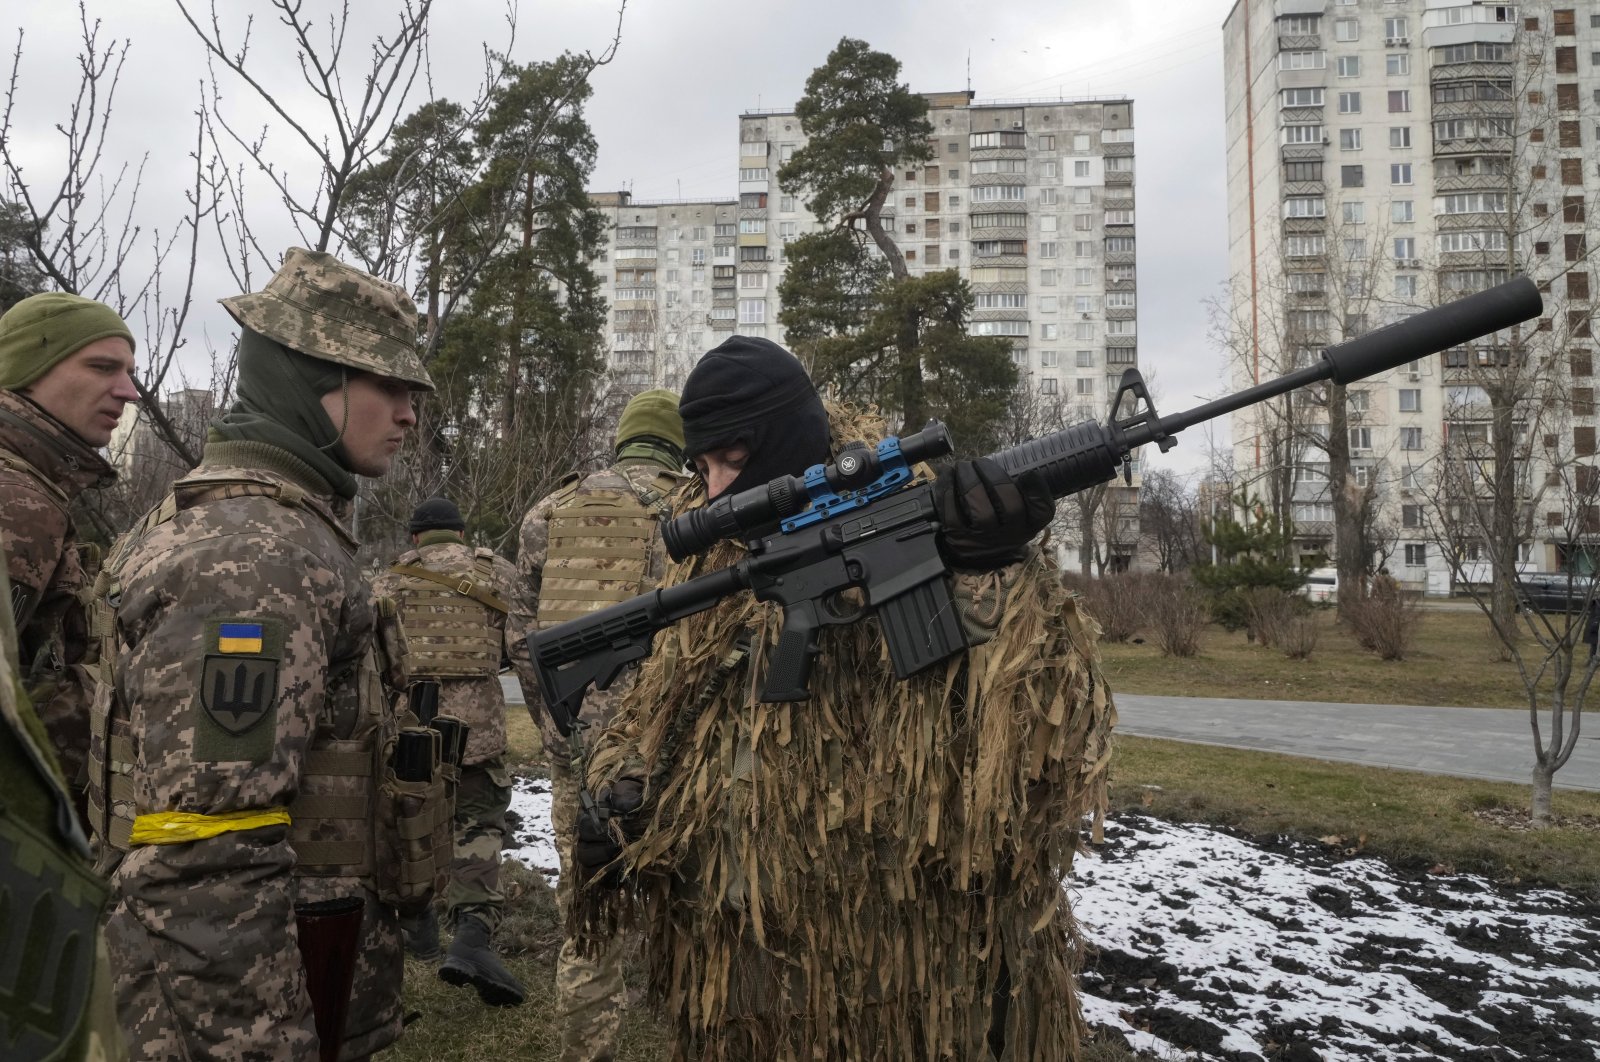 Ukrainian Territorial Defence Forces members prepare to repel the Russian army assault on the Kyiv outskirts, Ukraine, March 9, 2022. (AP Photo)